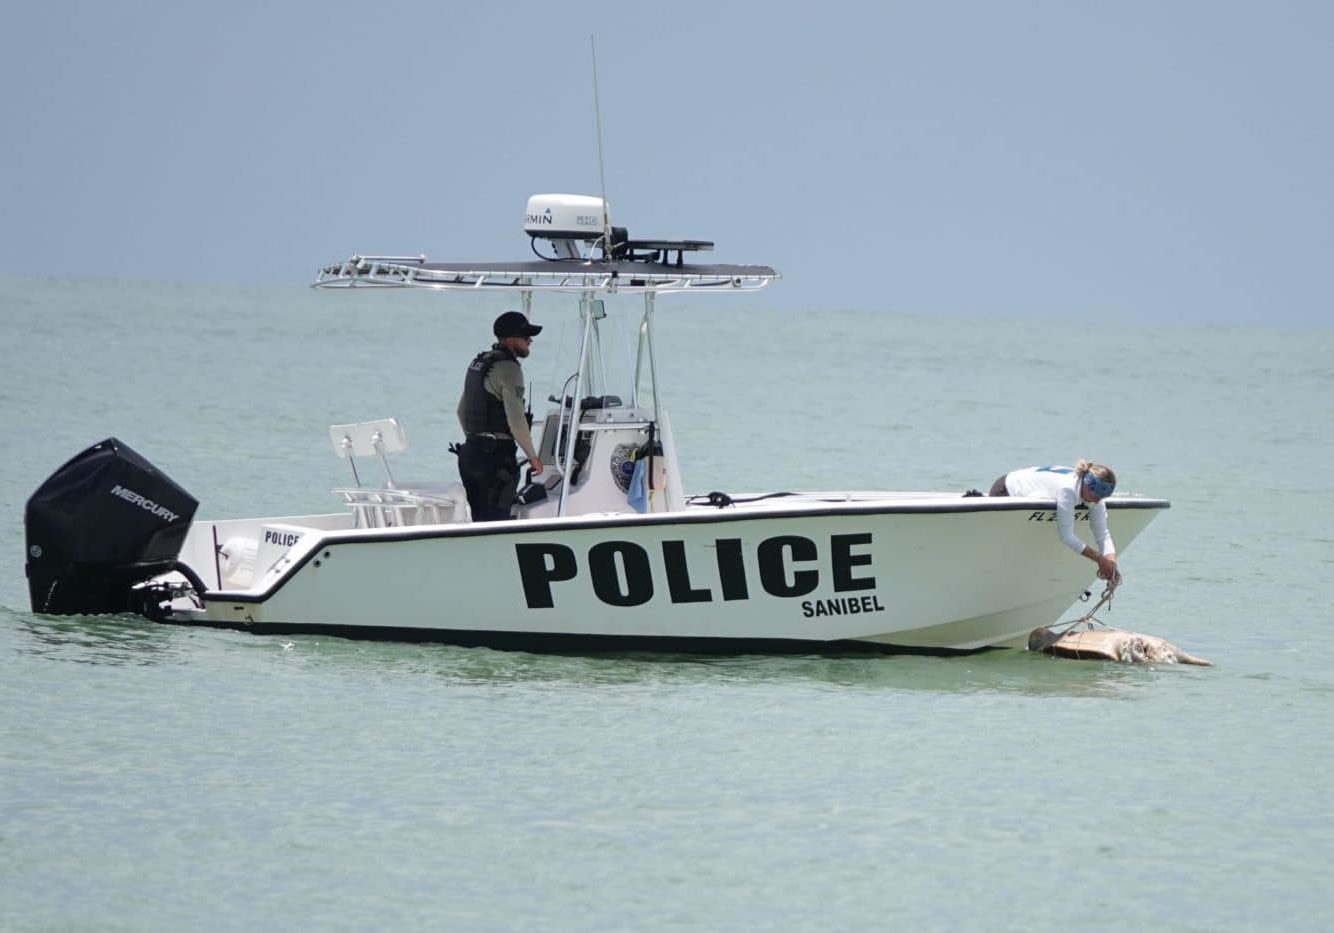 sea turtle stranding response with police boat